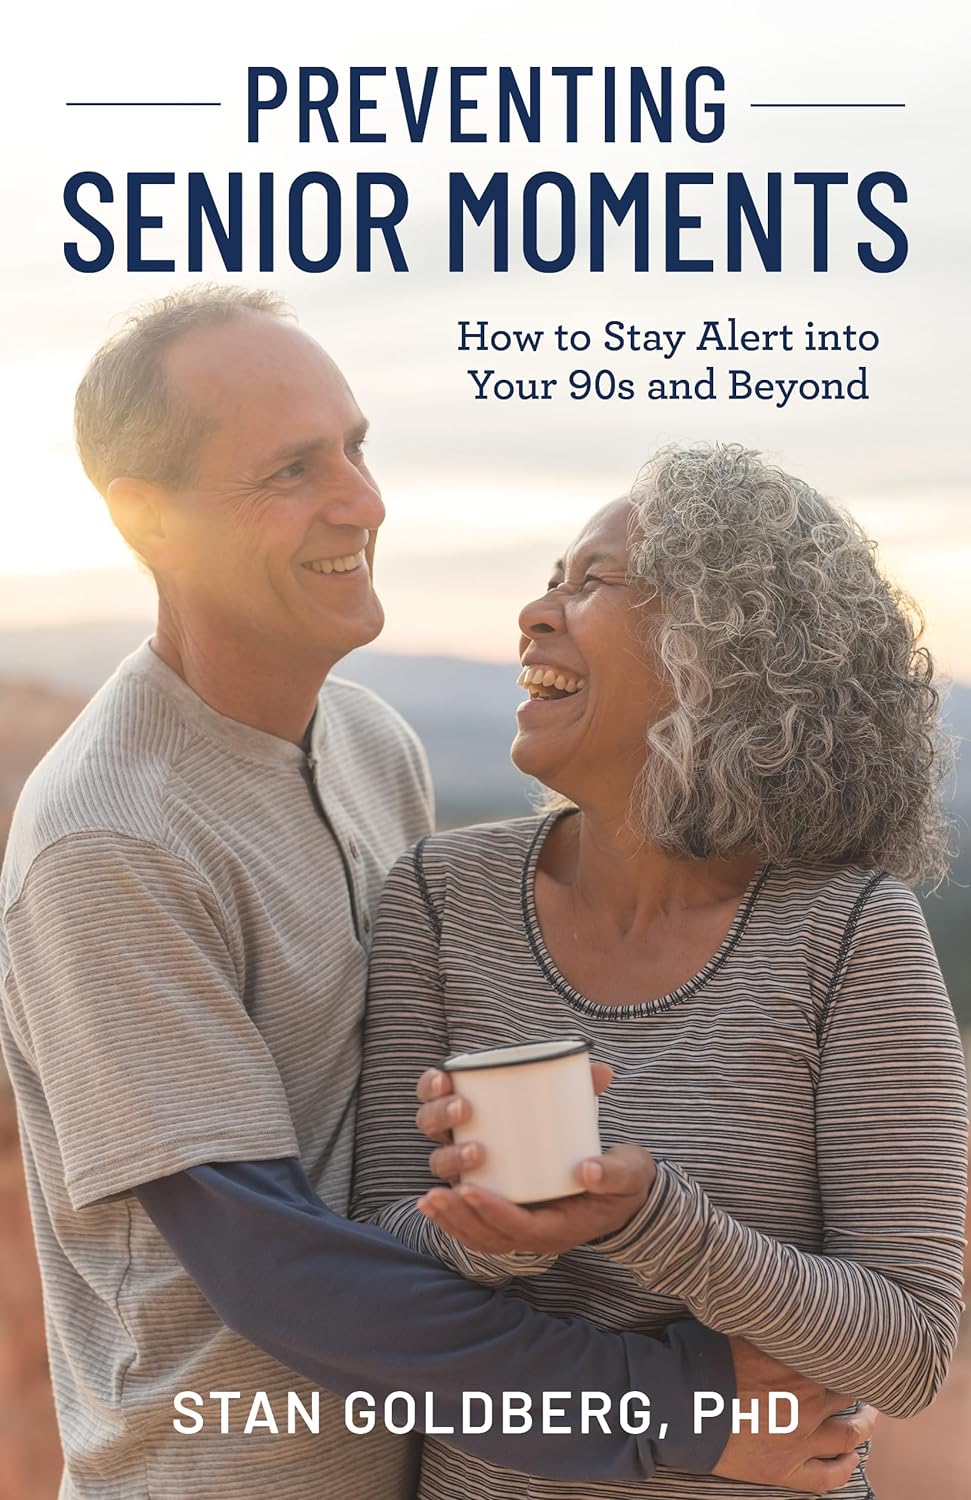 Preventing Senior Moments: How to Stay Alert into Your 90s and Beyond